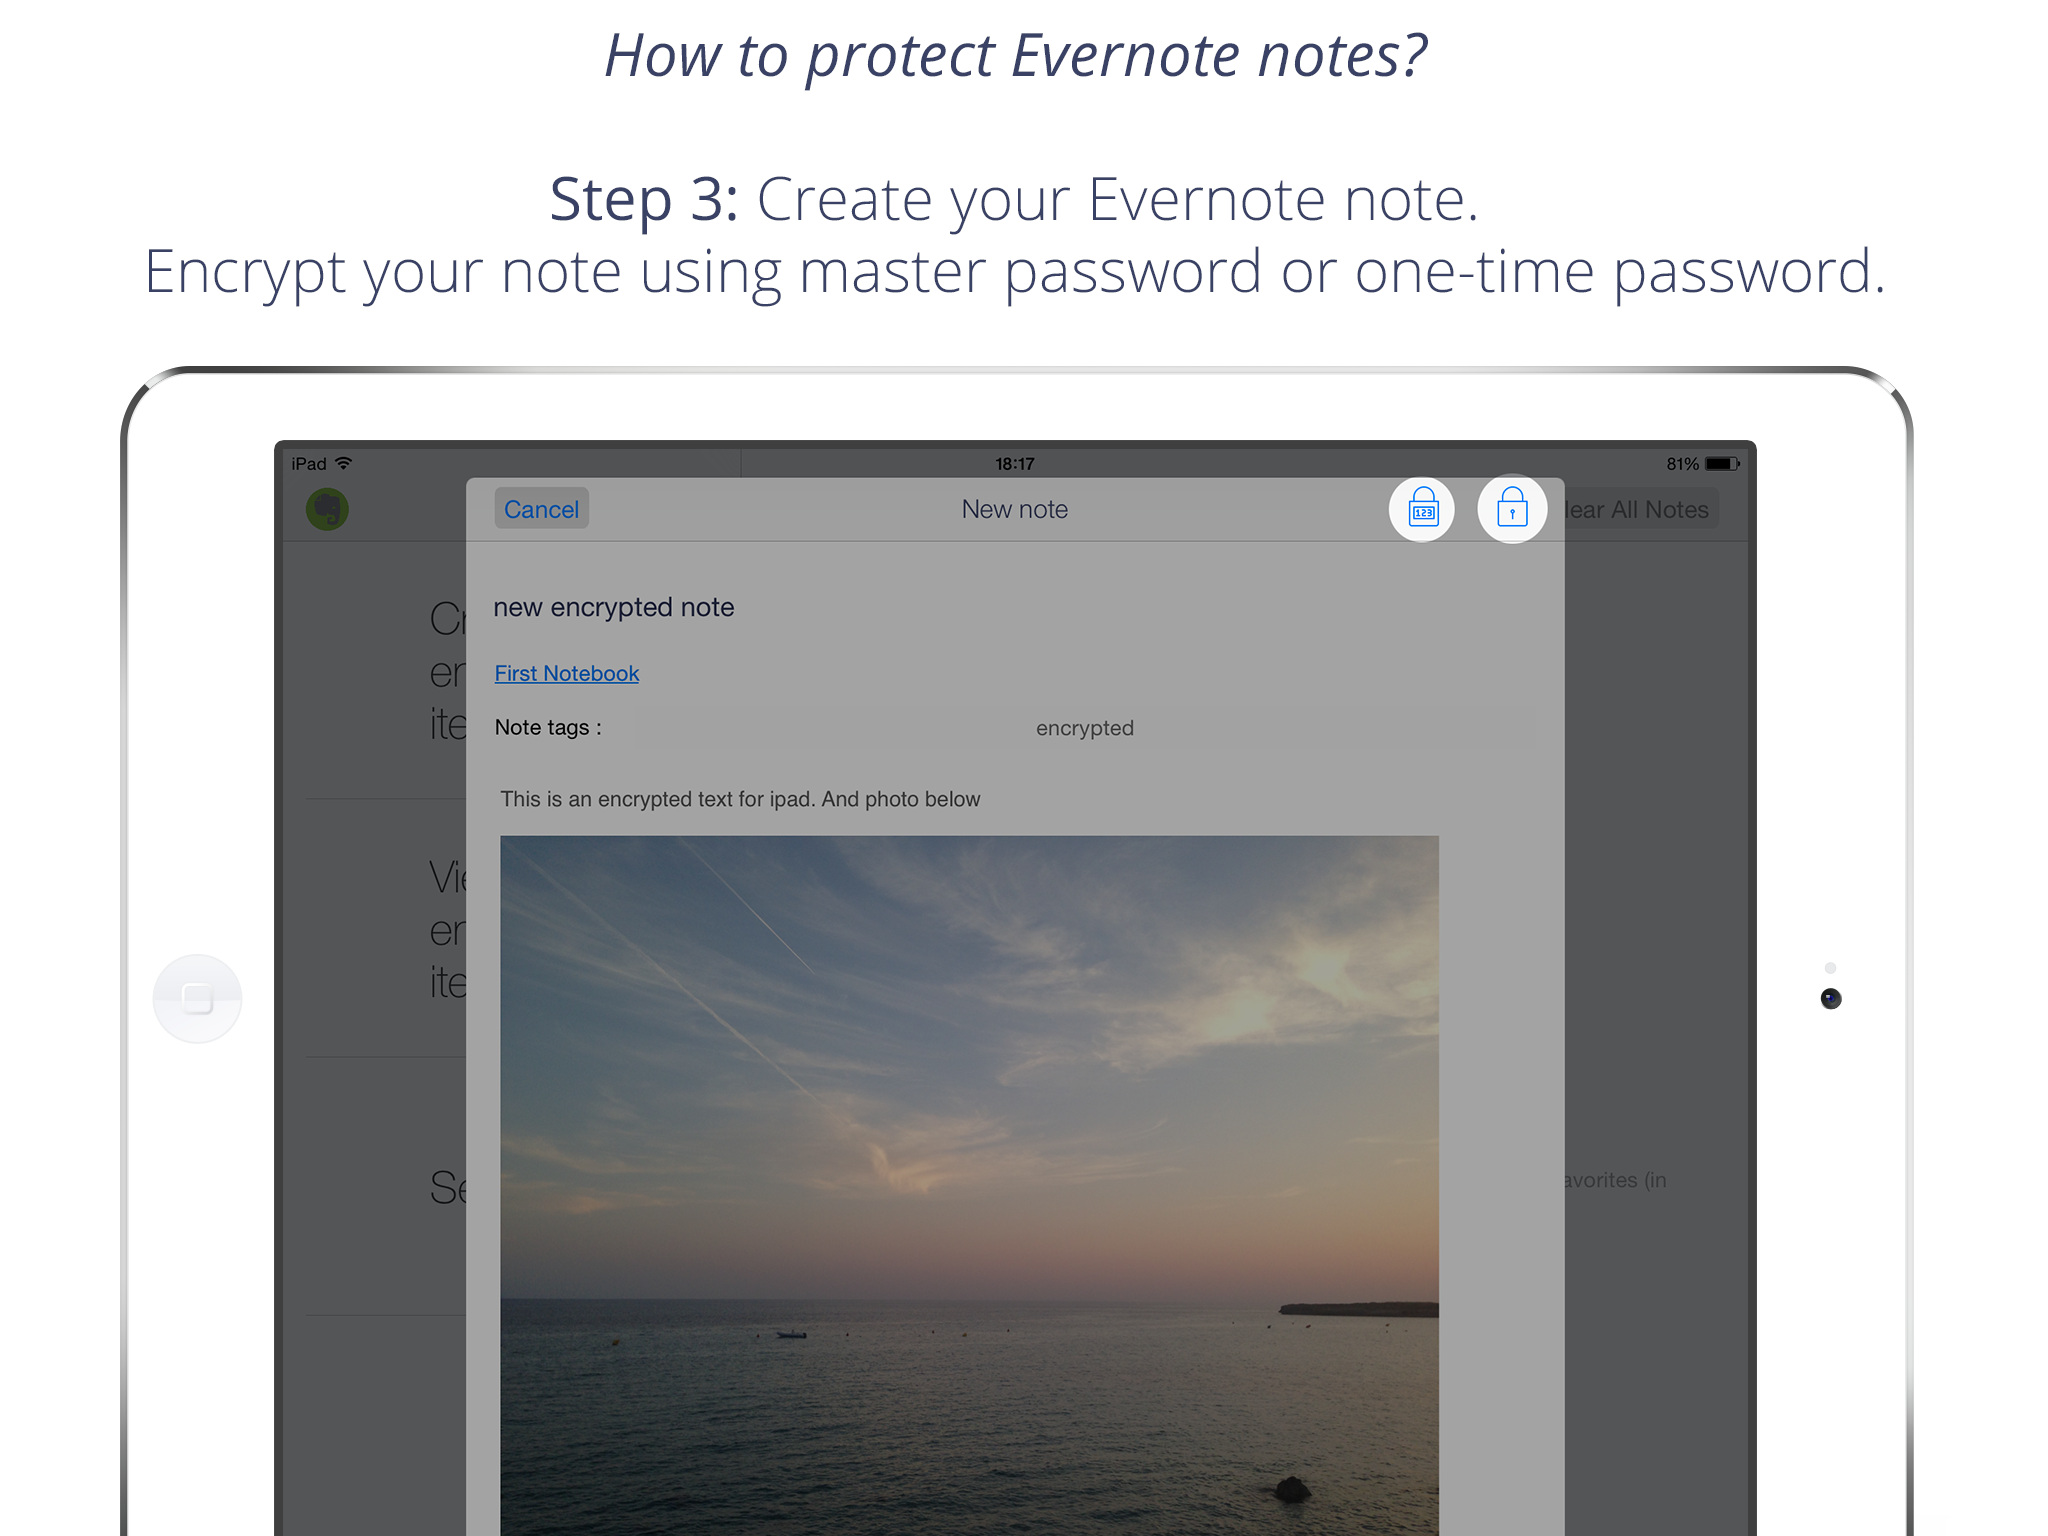 how to move notes in evernote ipad